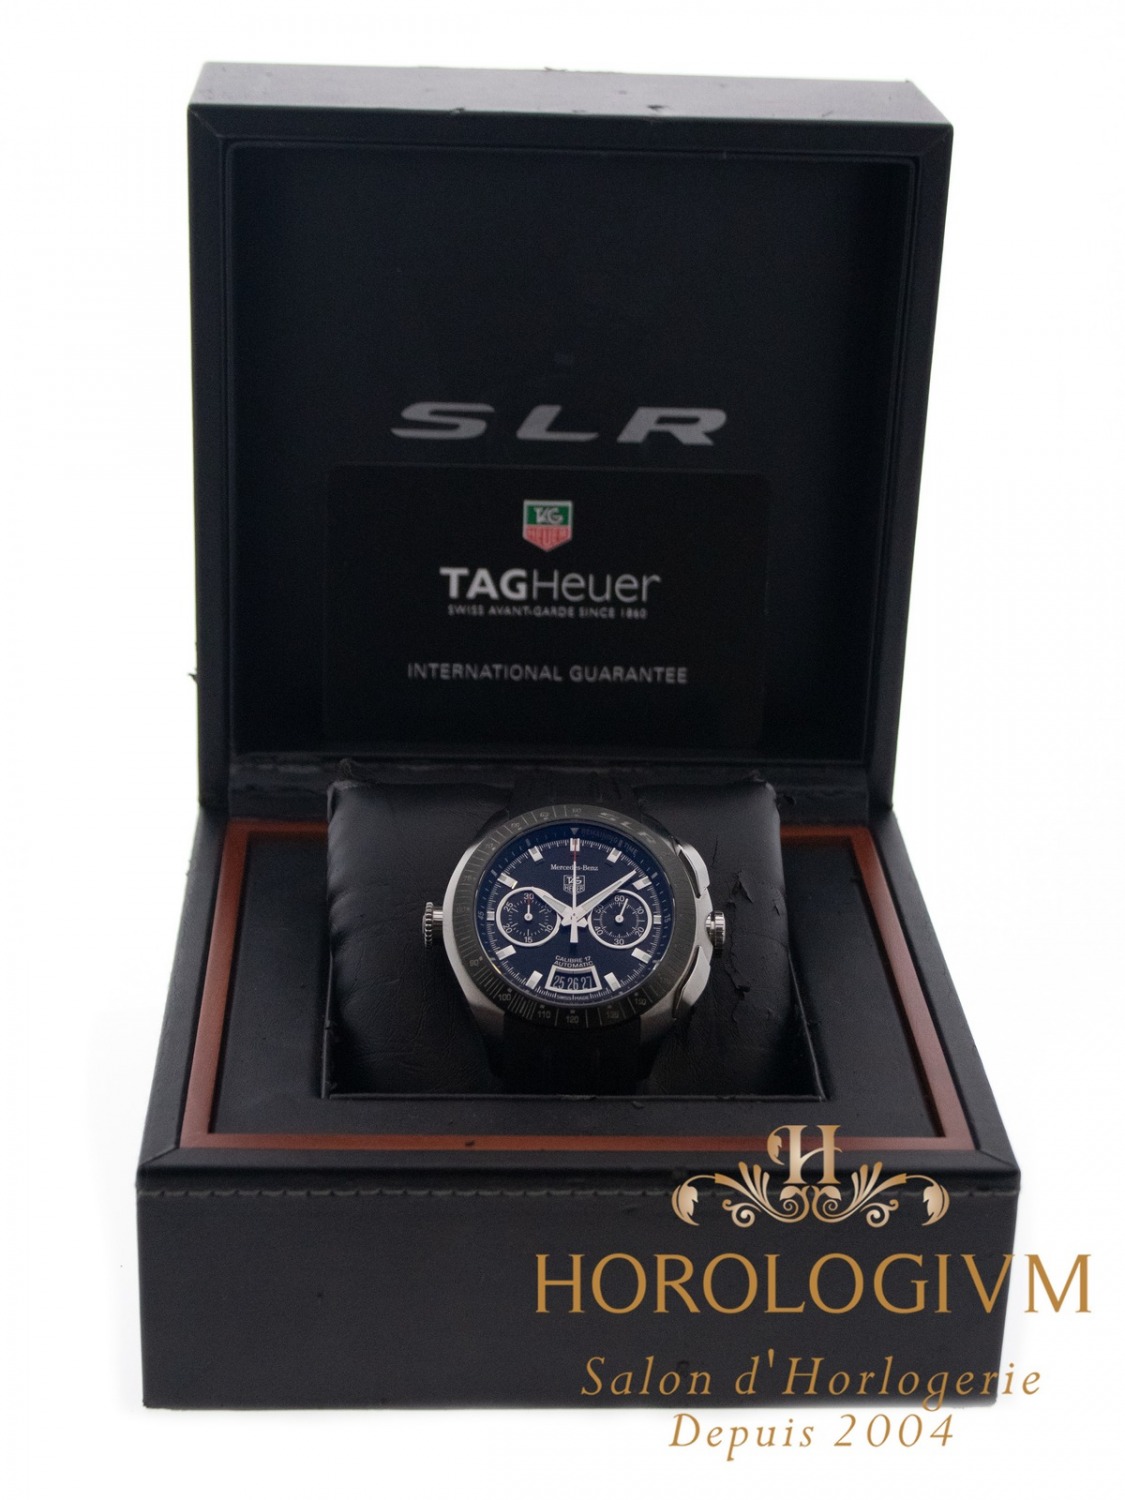 Tag Heuer Mercedes-Benz SLR Limited 3500 pcs watch, silver (case) and black (bezel)